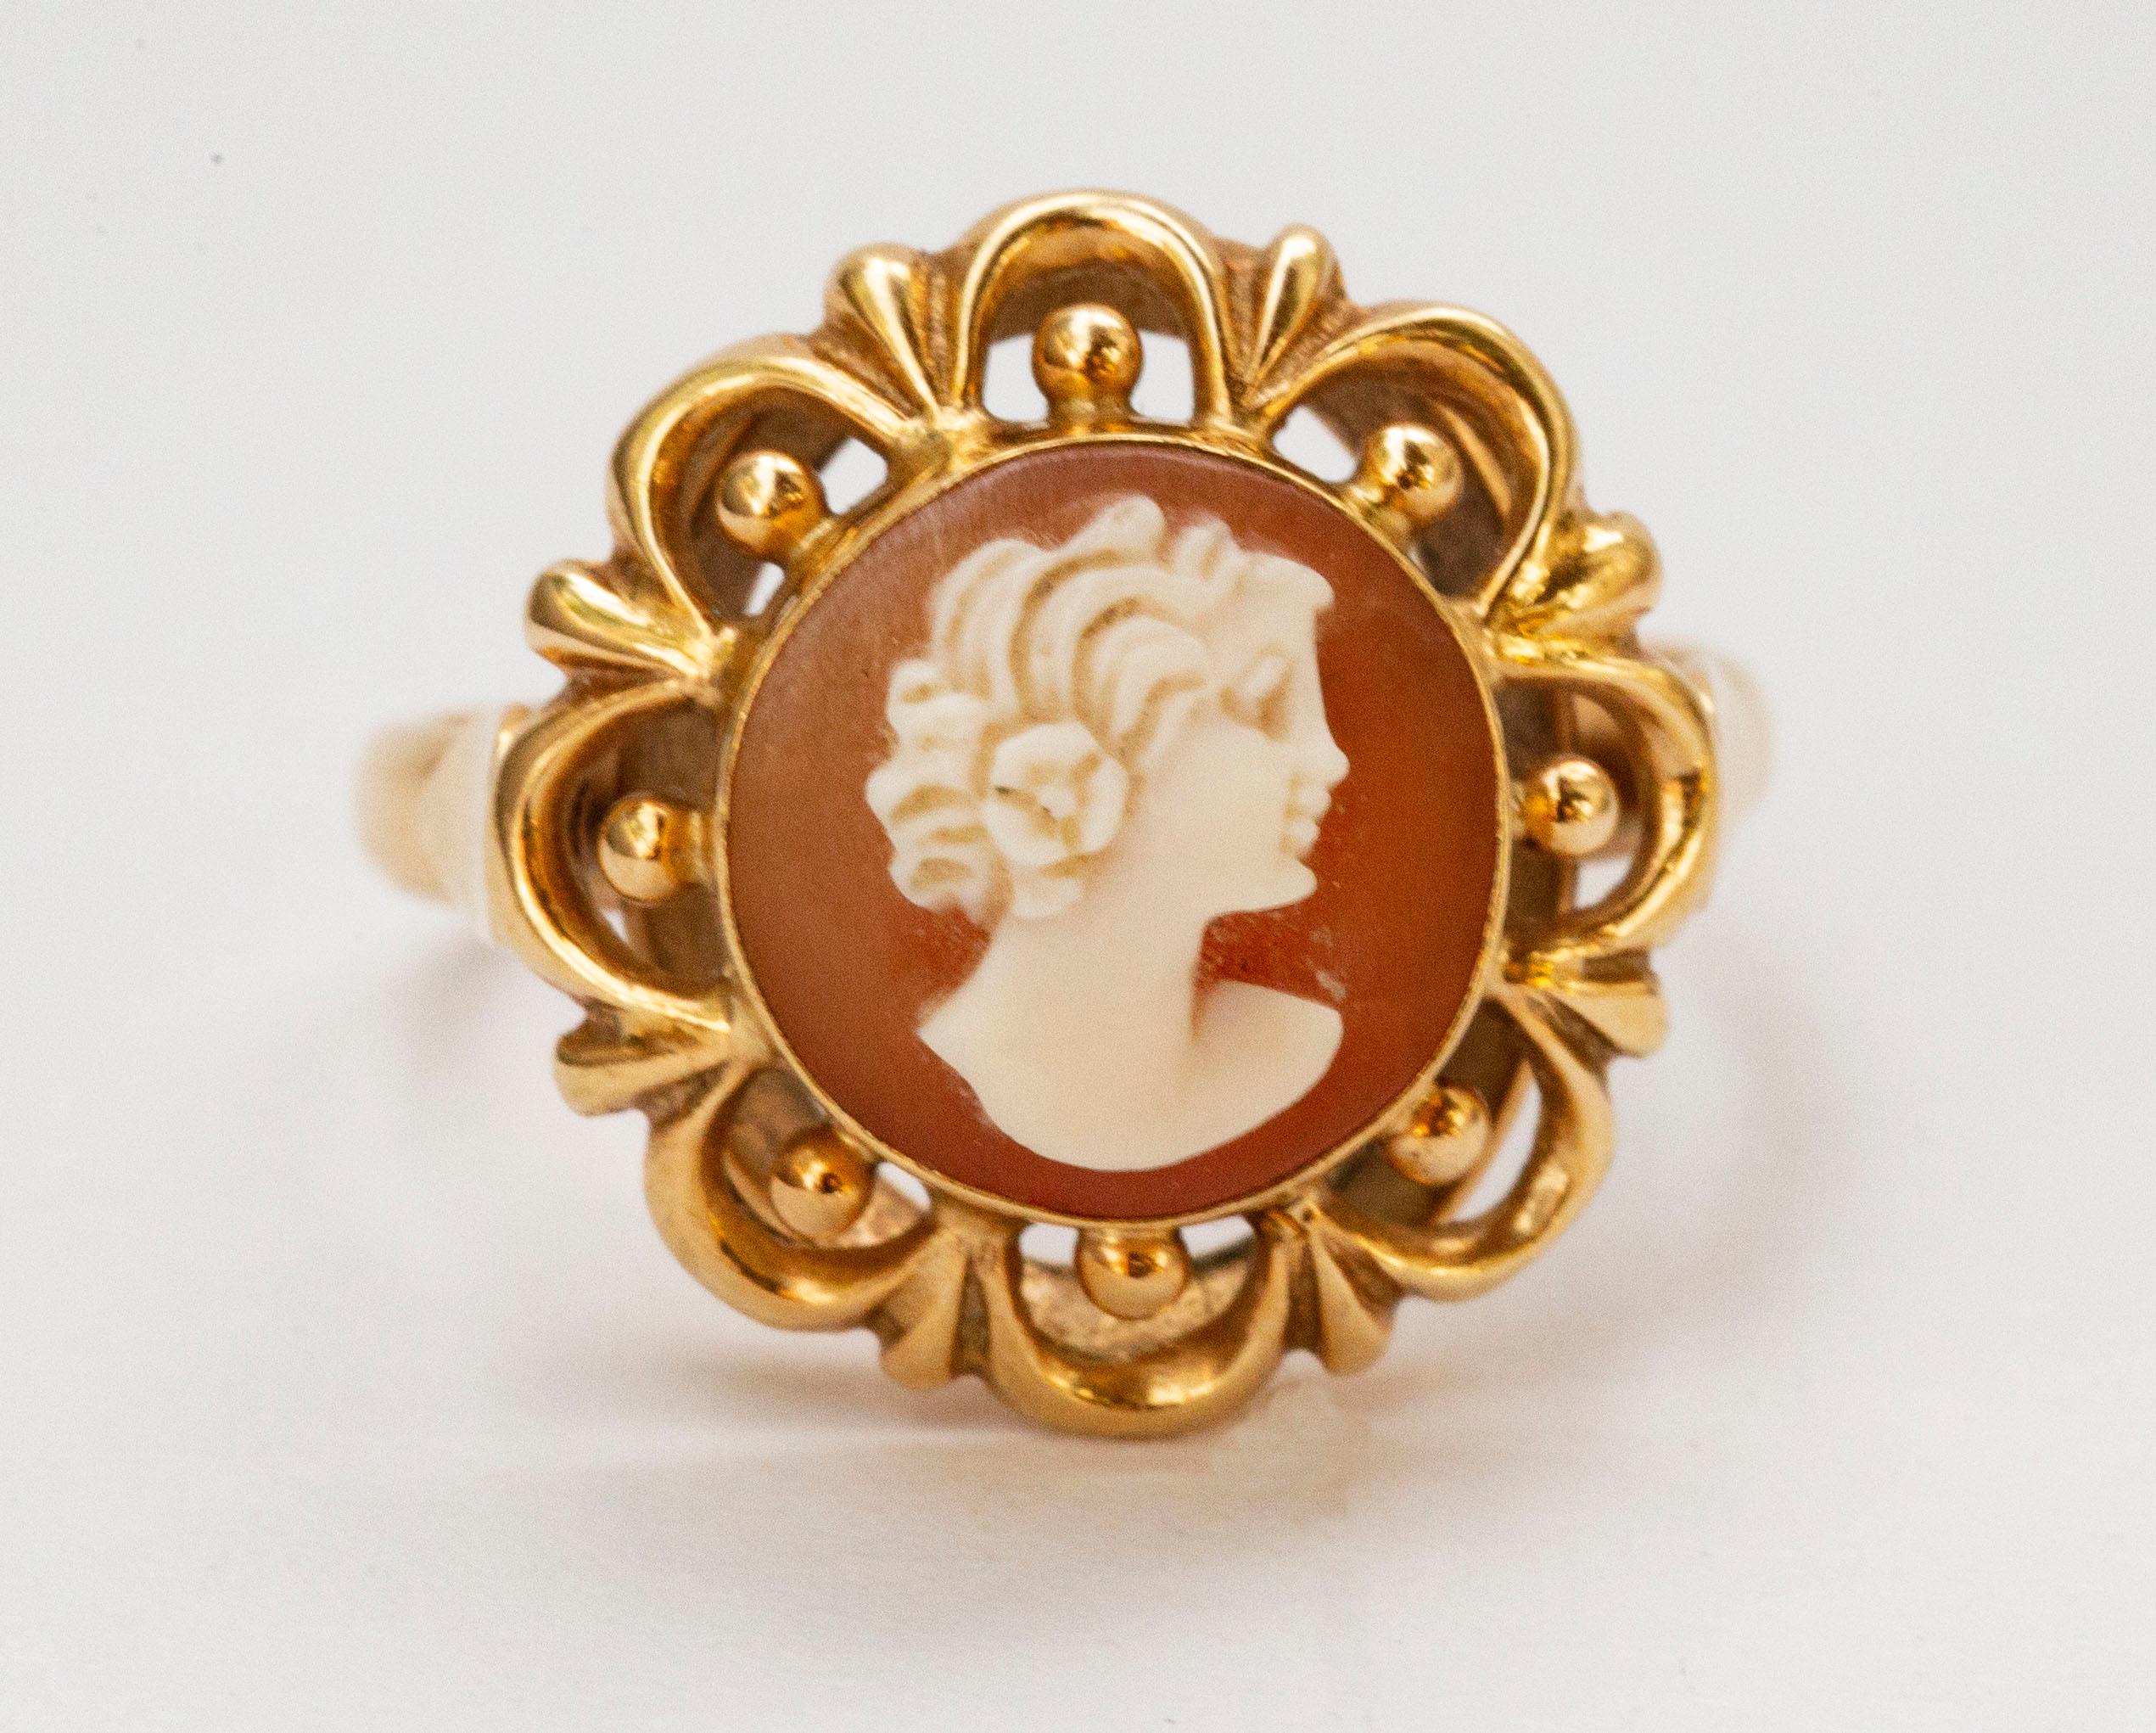 A vintage (ca. 1950s / 1960s) 14 karat solid yellow gold ring with a shell cameo featuring a female silhouette decorated with as openwork edge. The ring is marked with 585 that stands for the 14 karat gold content, and it tested positive for the 14